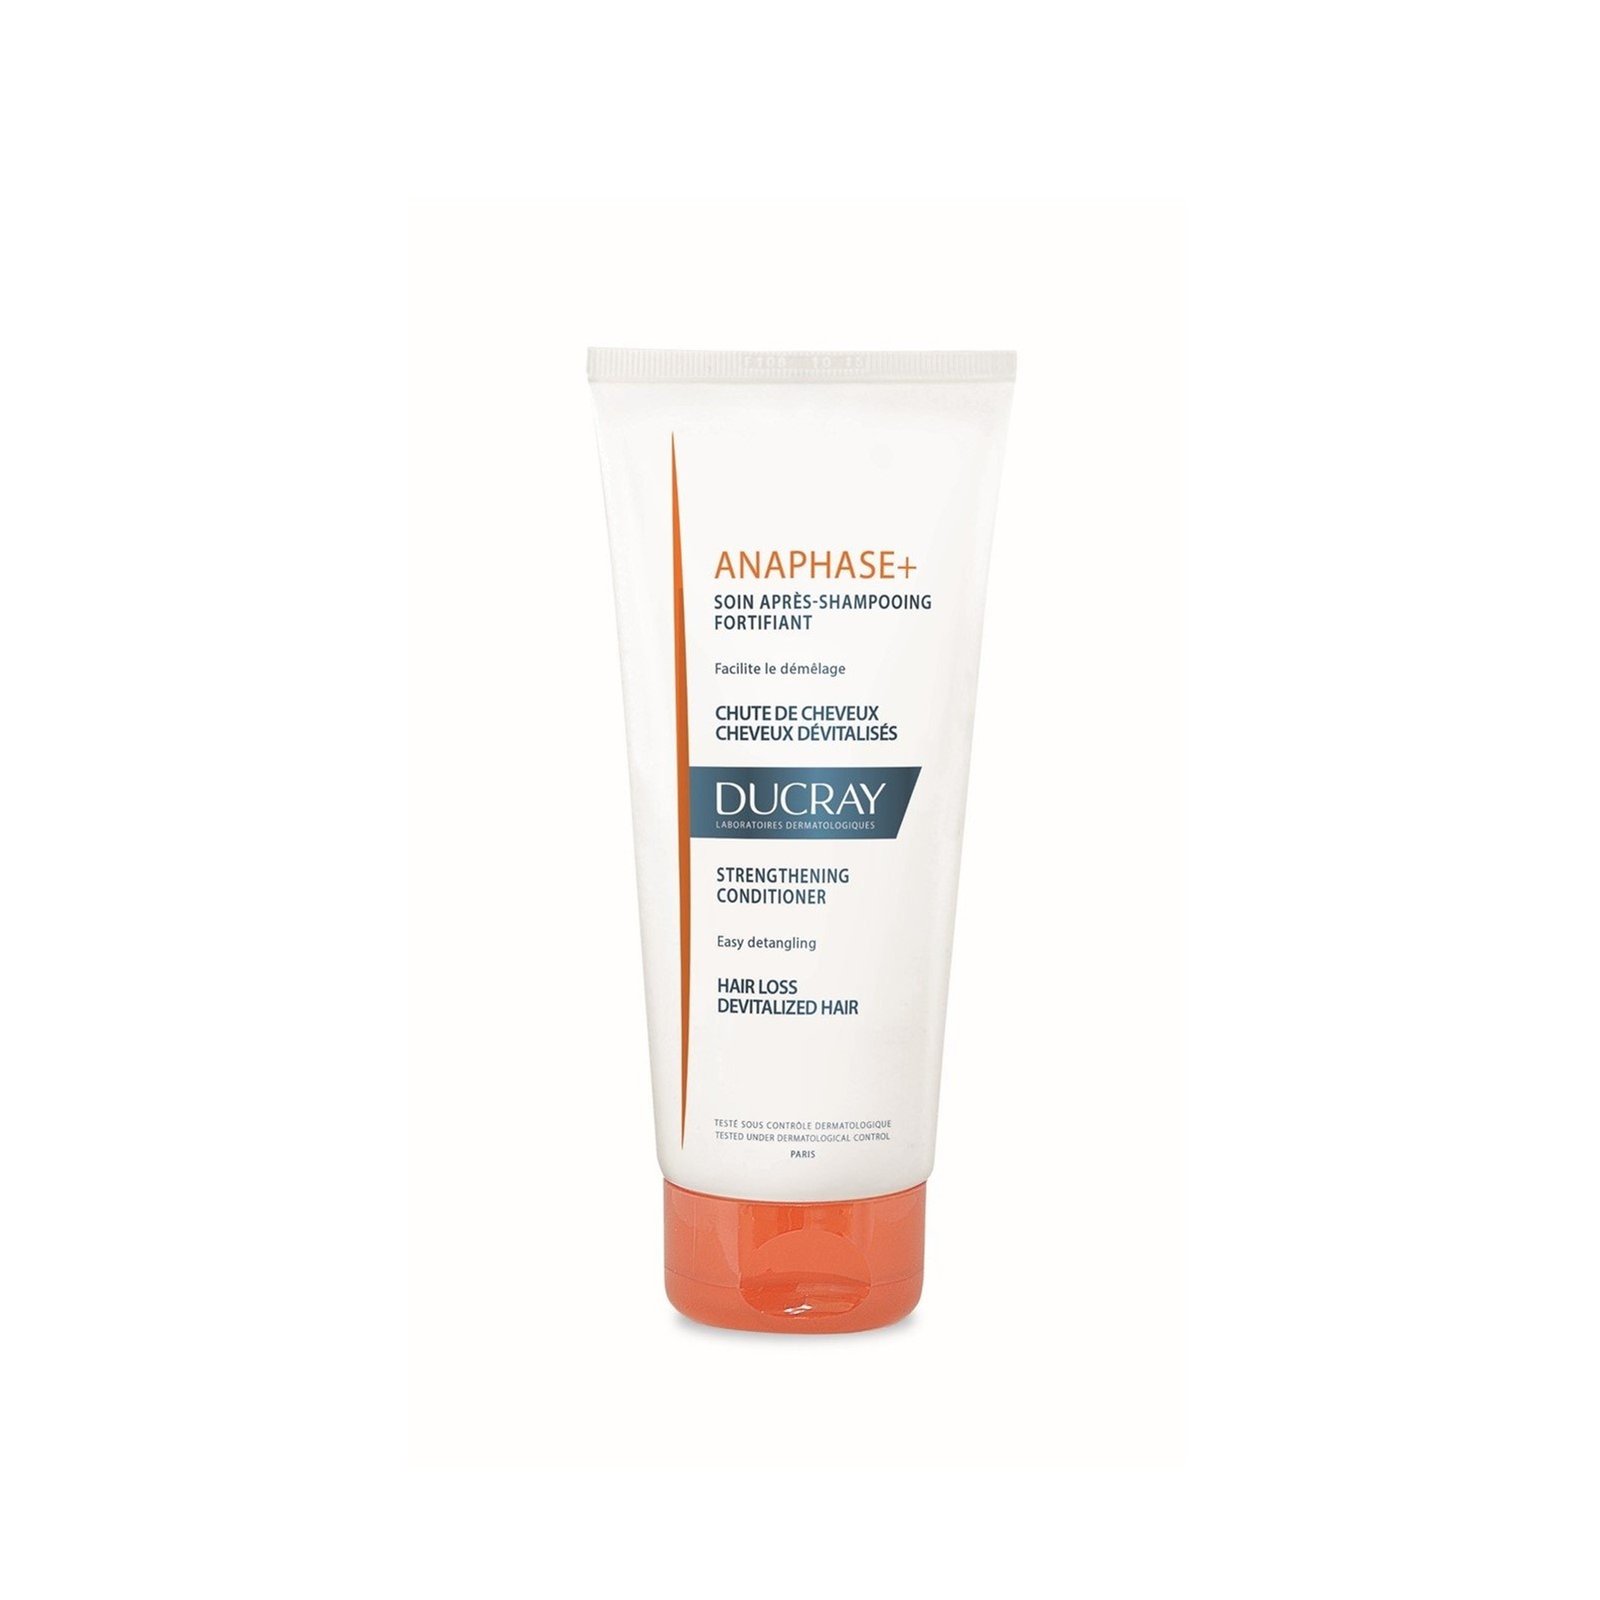 Ducray Anaphase Strengthening Conditioner 200ml (6.76fl oz)